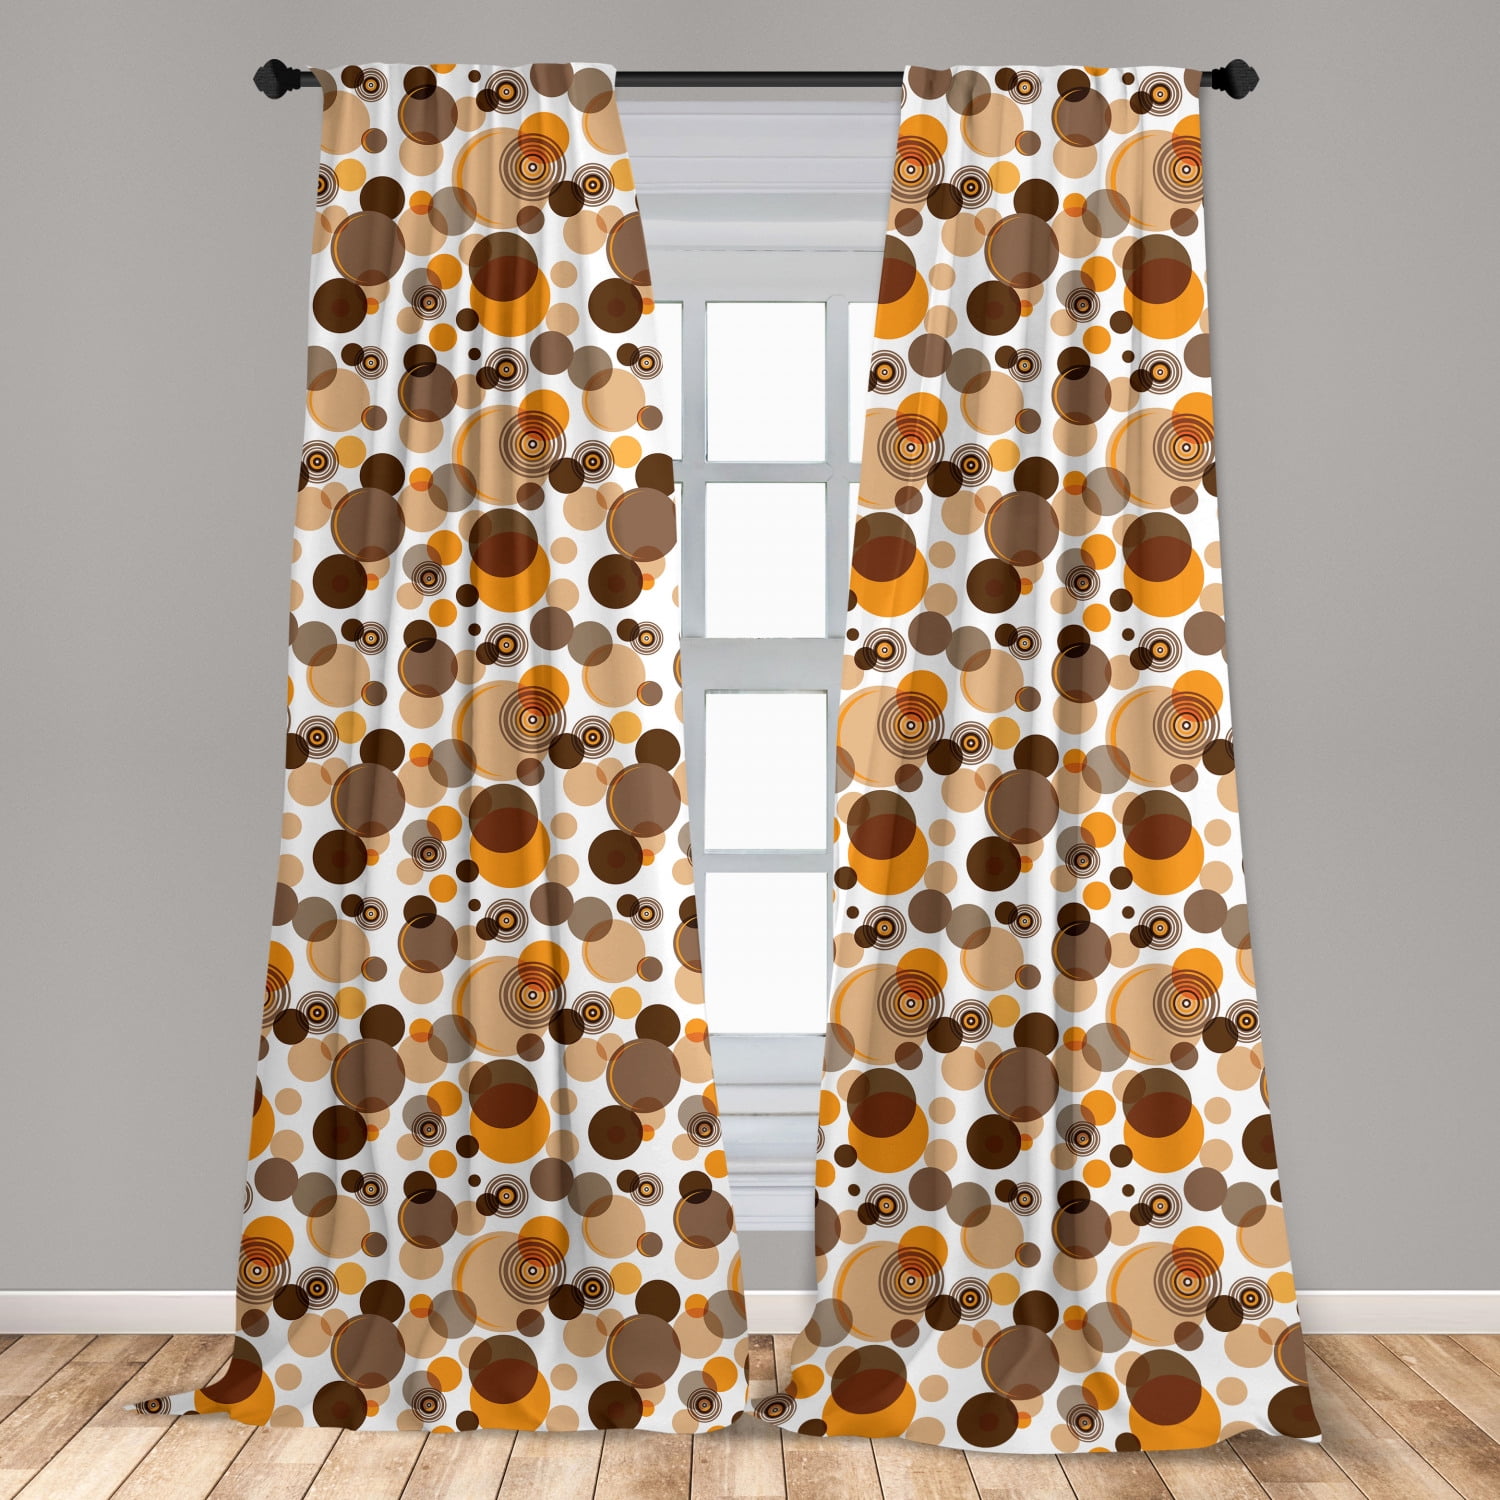 Brown Curtains Coffee Typo Hearts Beans Window Drapes 2 Panel Set 108x63 Inches 